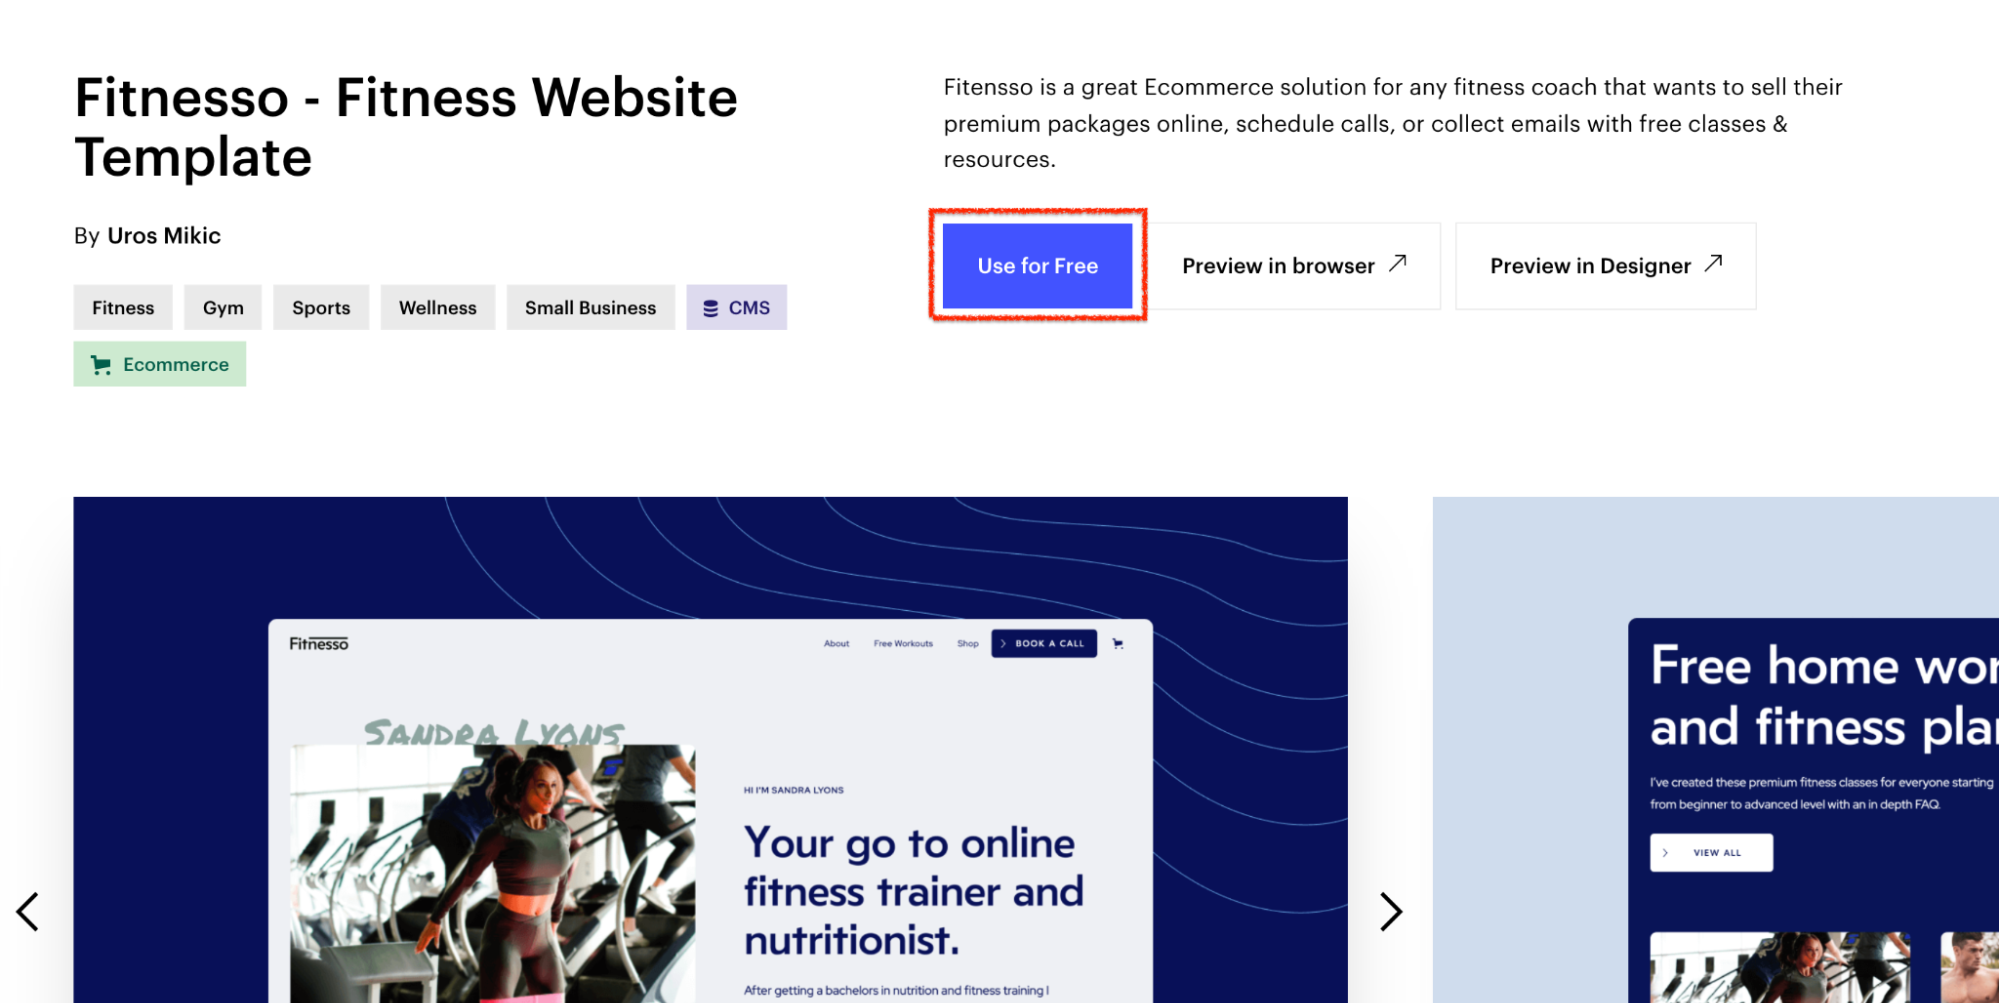 Fitnesso template to use for free